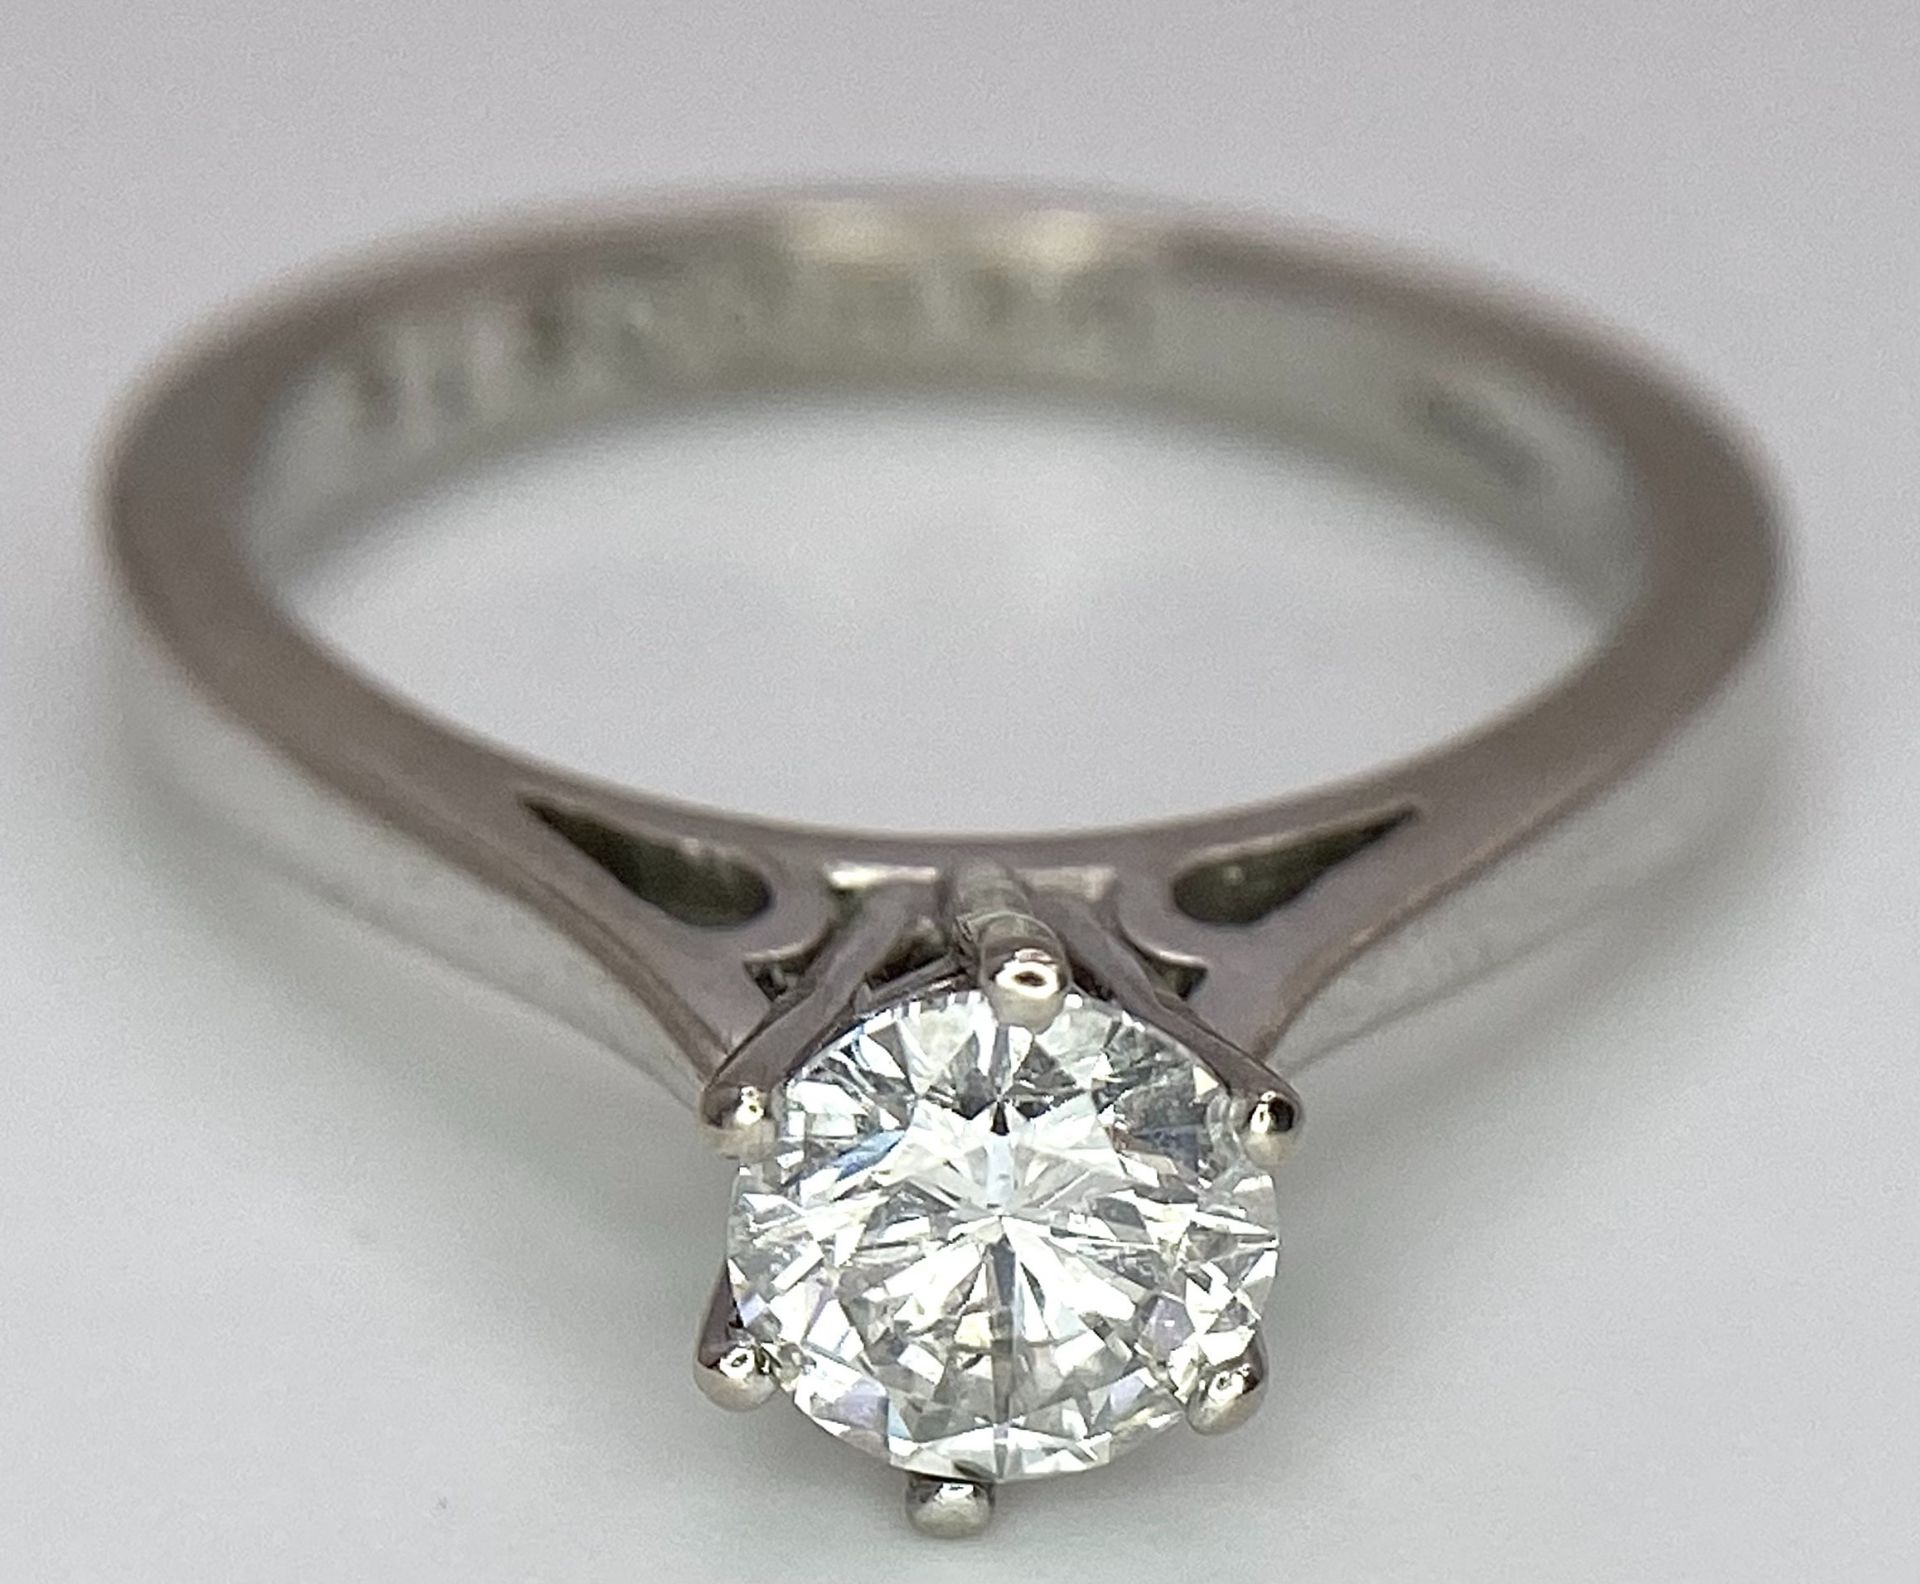 AN 18K WHITE GOLD DIAMOND SOLITAIRE RING - BRILLIANT ROUND CUT 0.70CT. 4.2G. SIZE M - Image 6 of 9